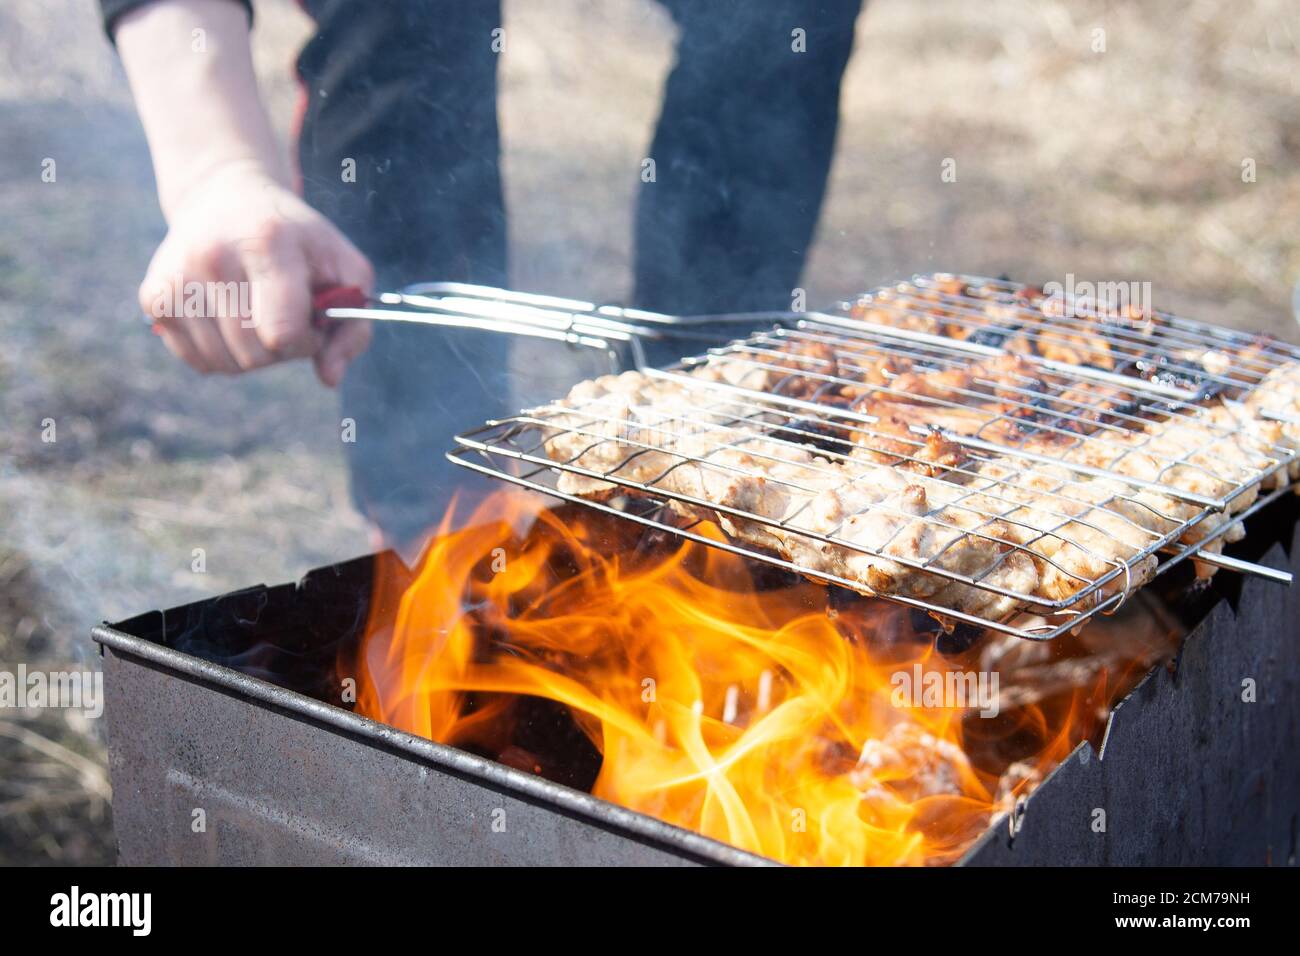 Chicken Wings On Grill, Man cooking meat on barbecue grill outdoors, closeup Stock Photo